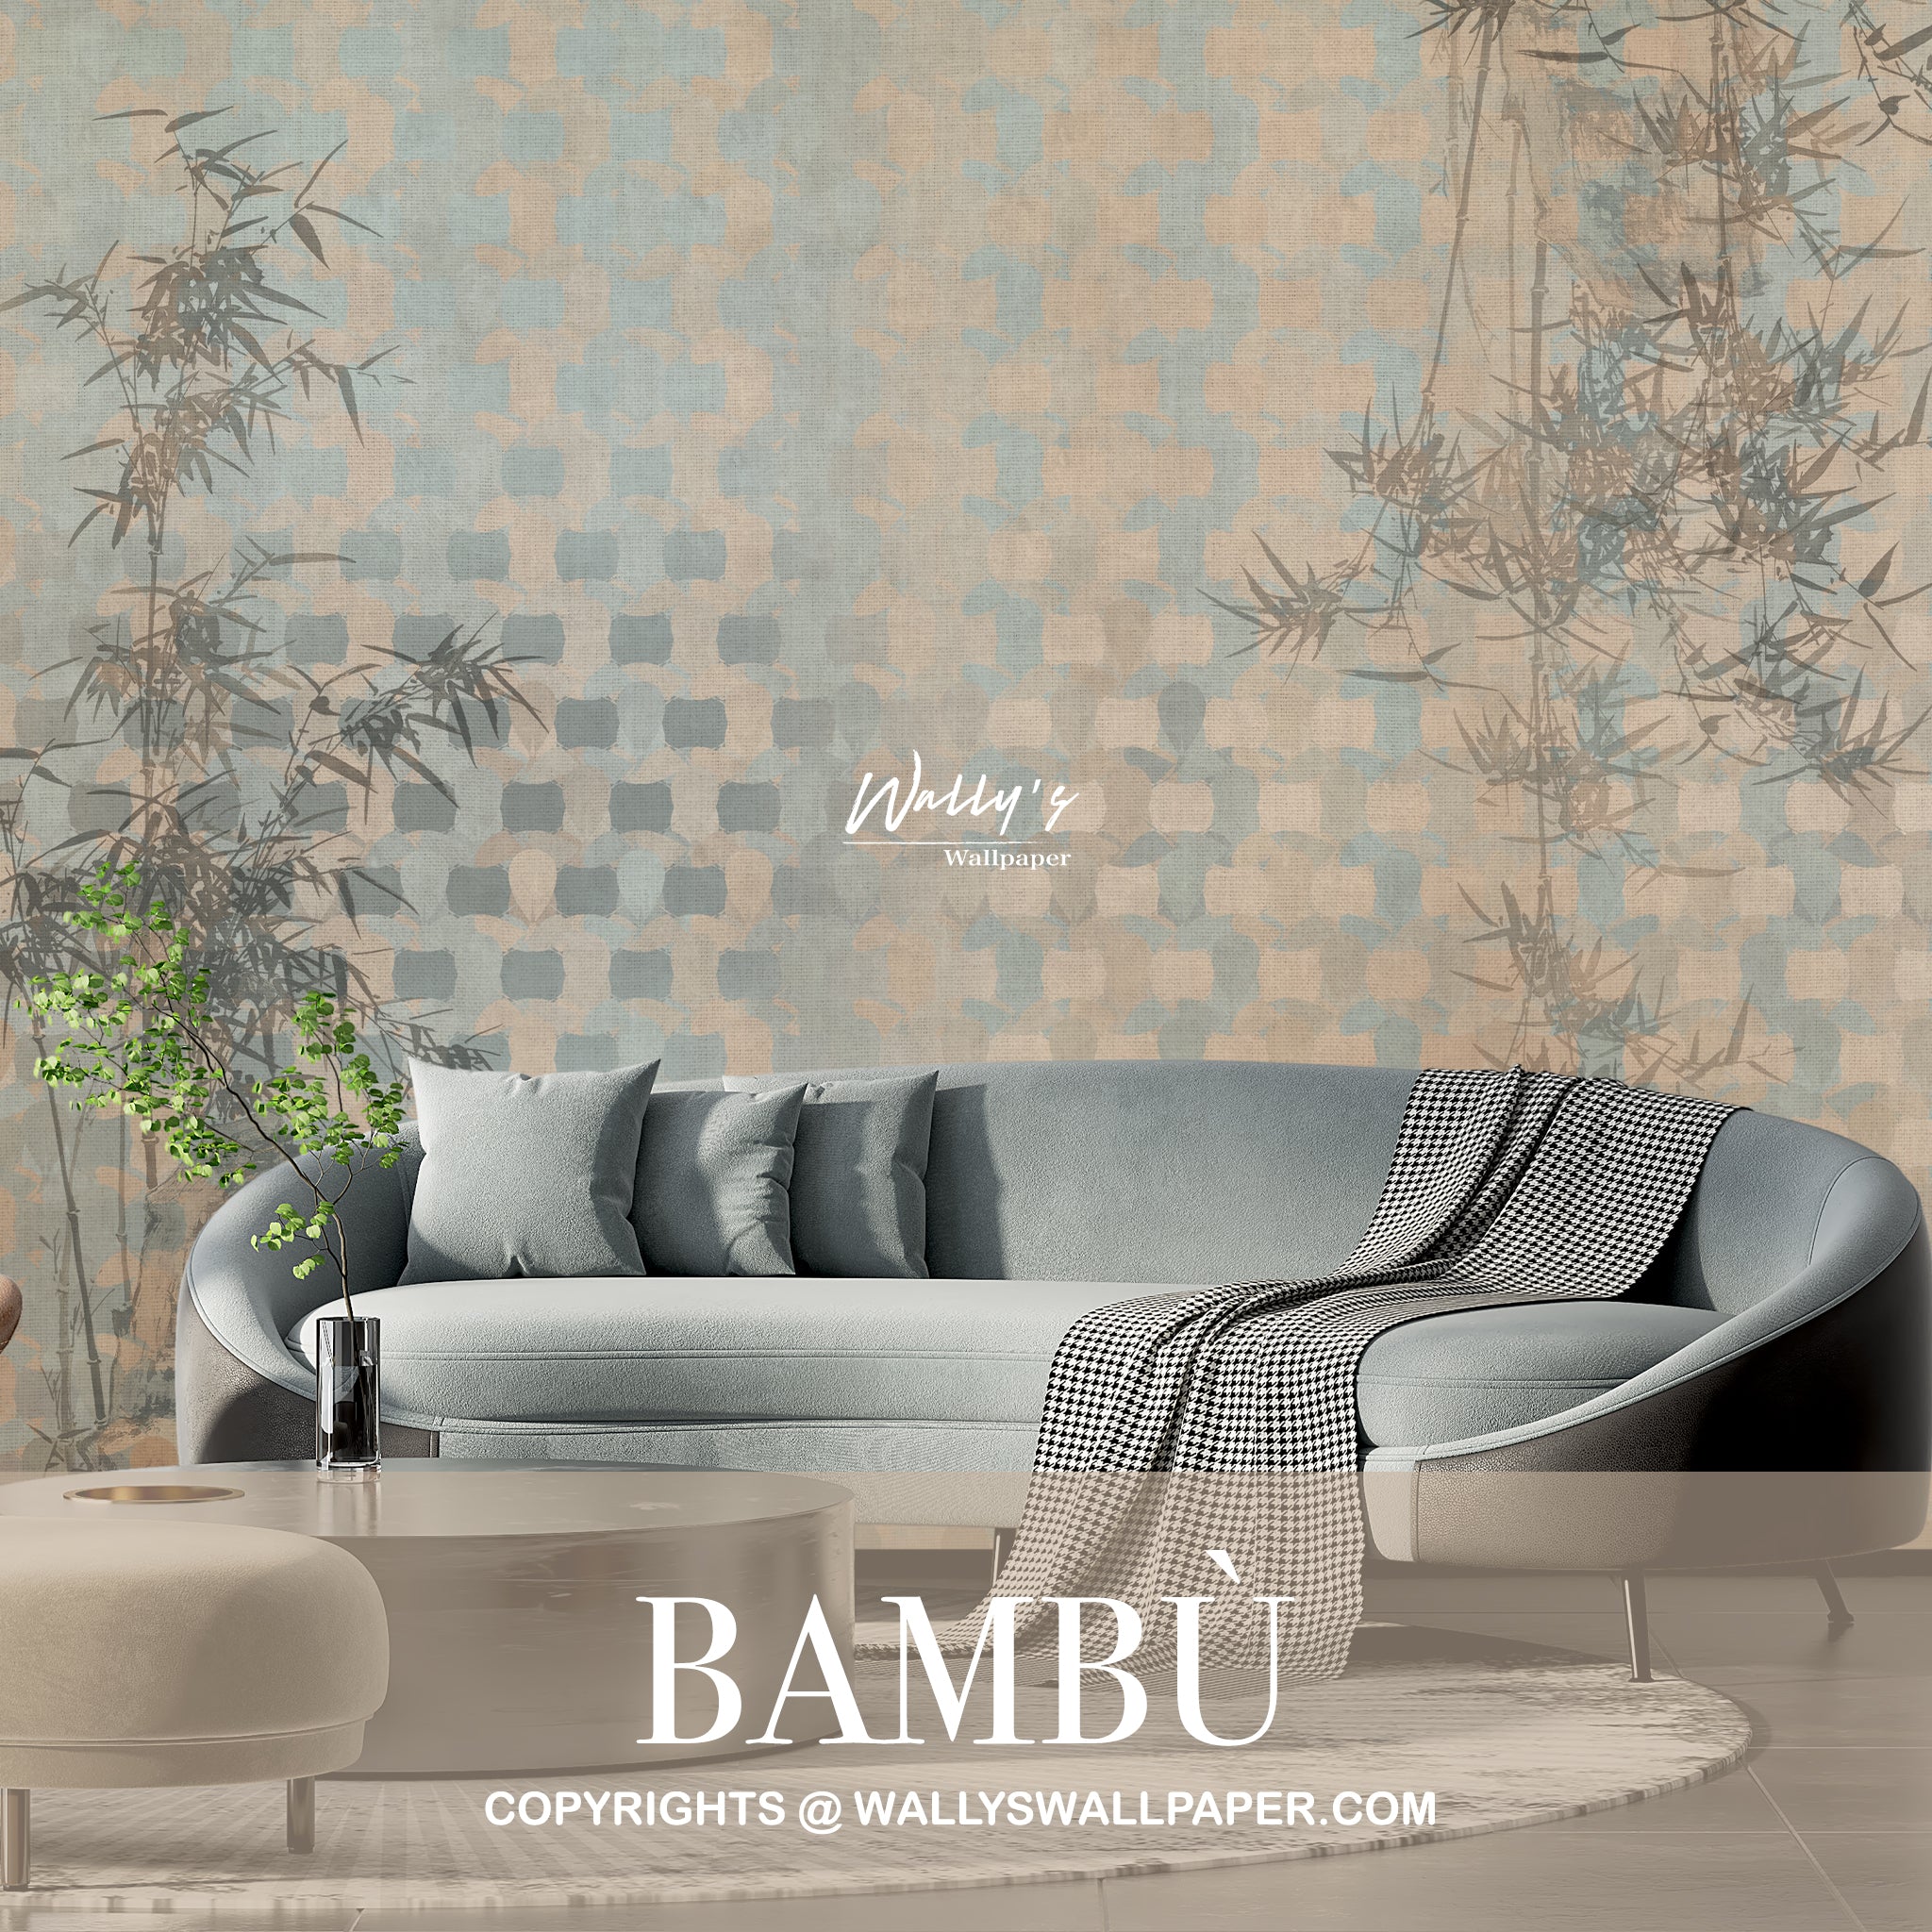 A living room with a premium quality sofa and a wall adorned with the word bambu, featuring the best wallpaper in Saudi Arabia and the middle east.